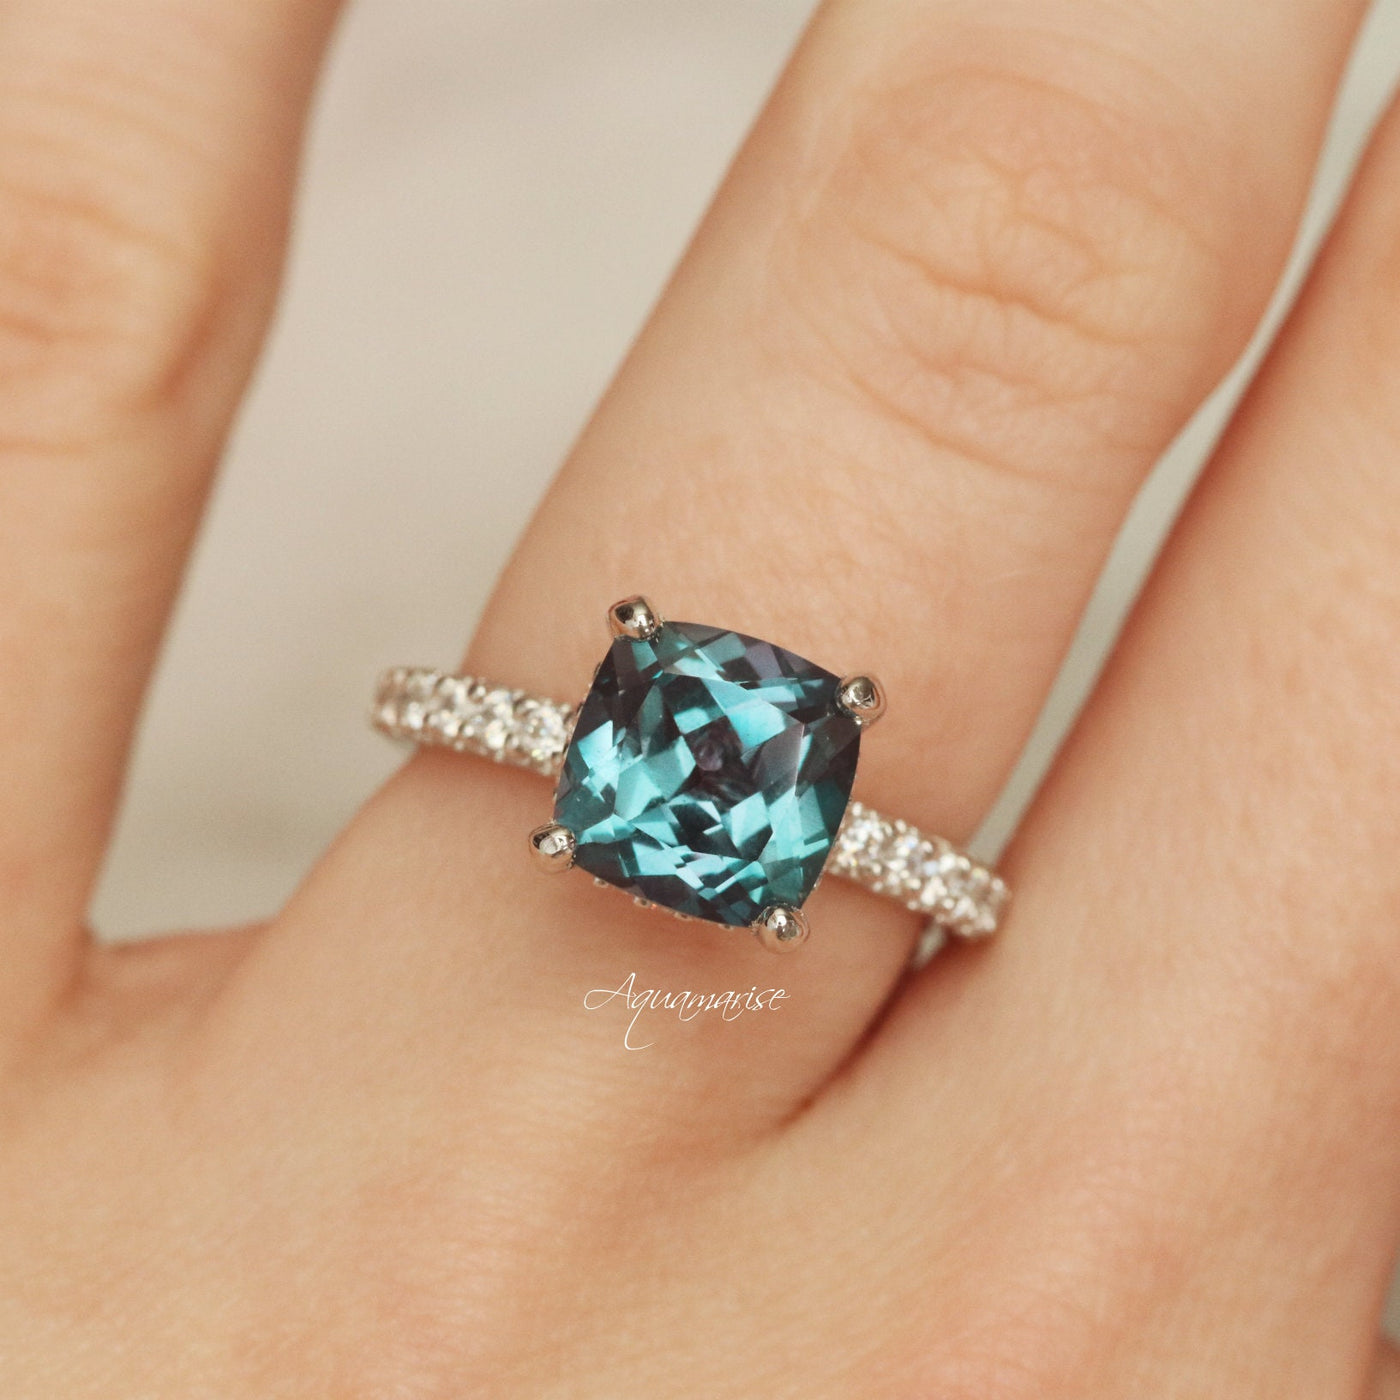 Cushion Hidden Halo Teal Alexandrite Ring- Sterling Silver